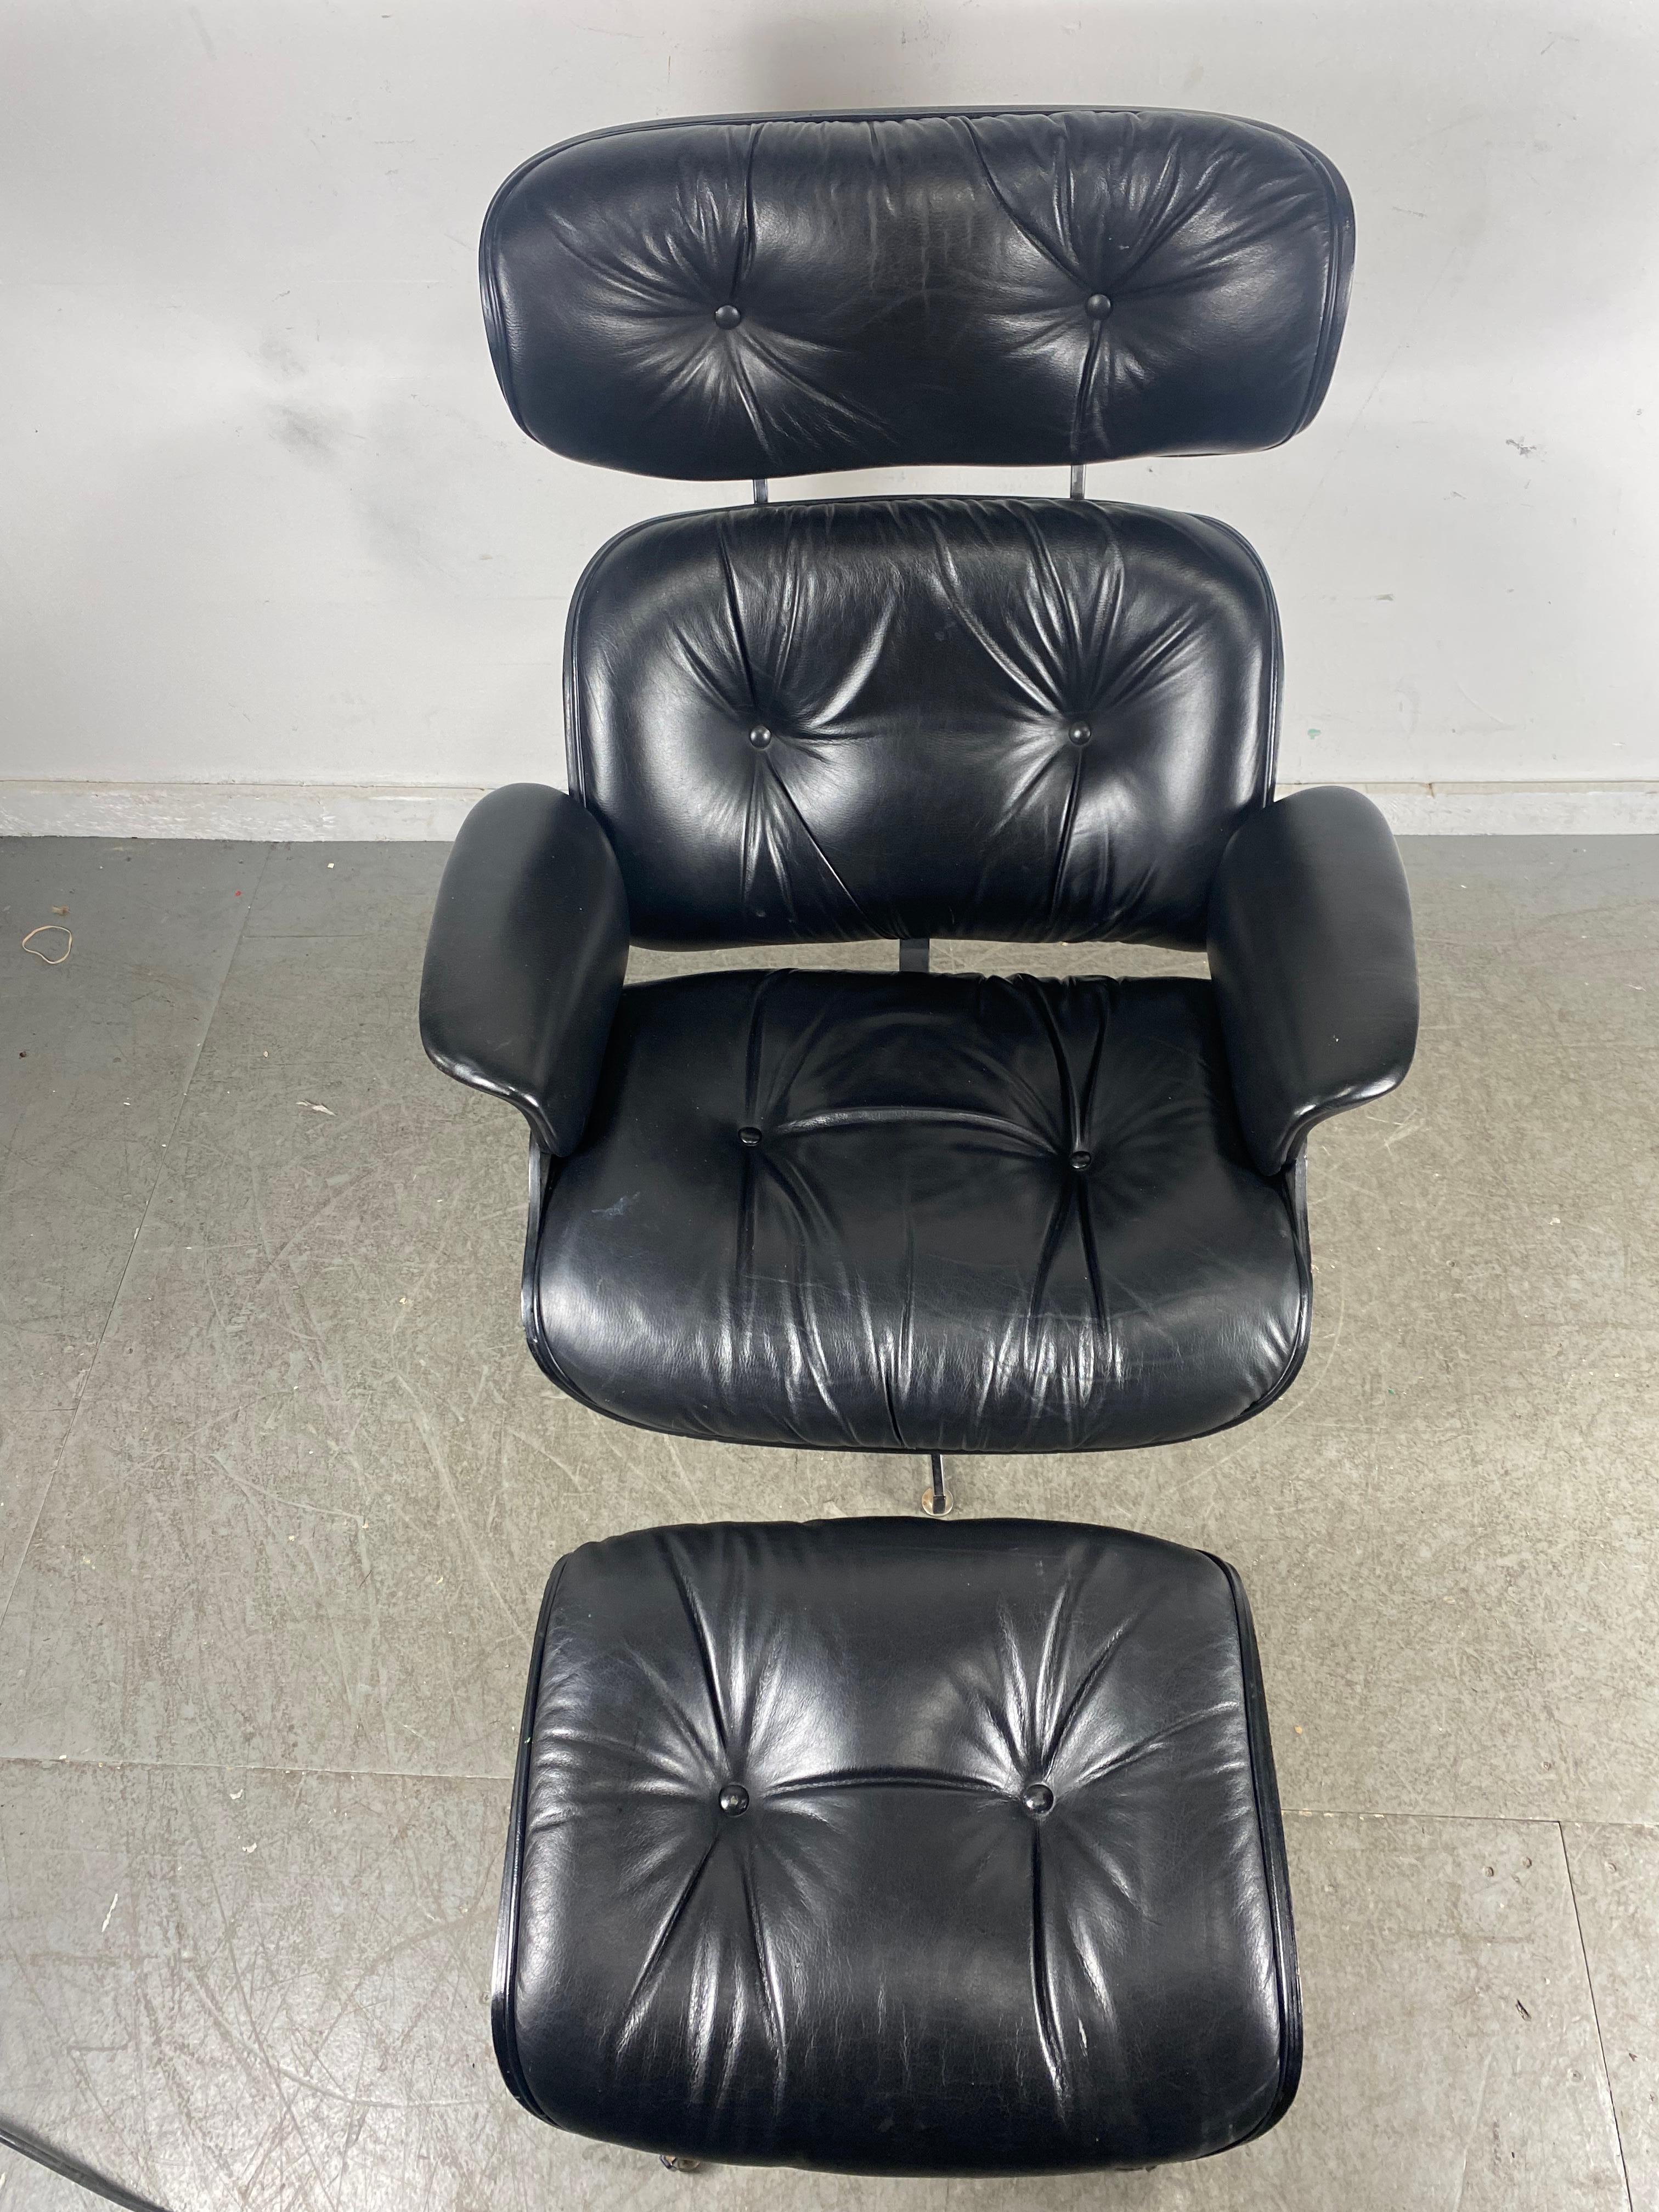 Late 20th Century Eames Style Lounge Chair and Ottoman, Leather, Plycraft, Classic Modernist